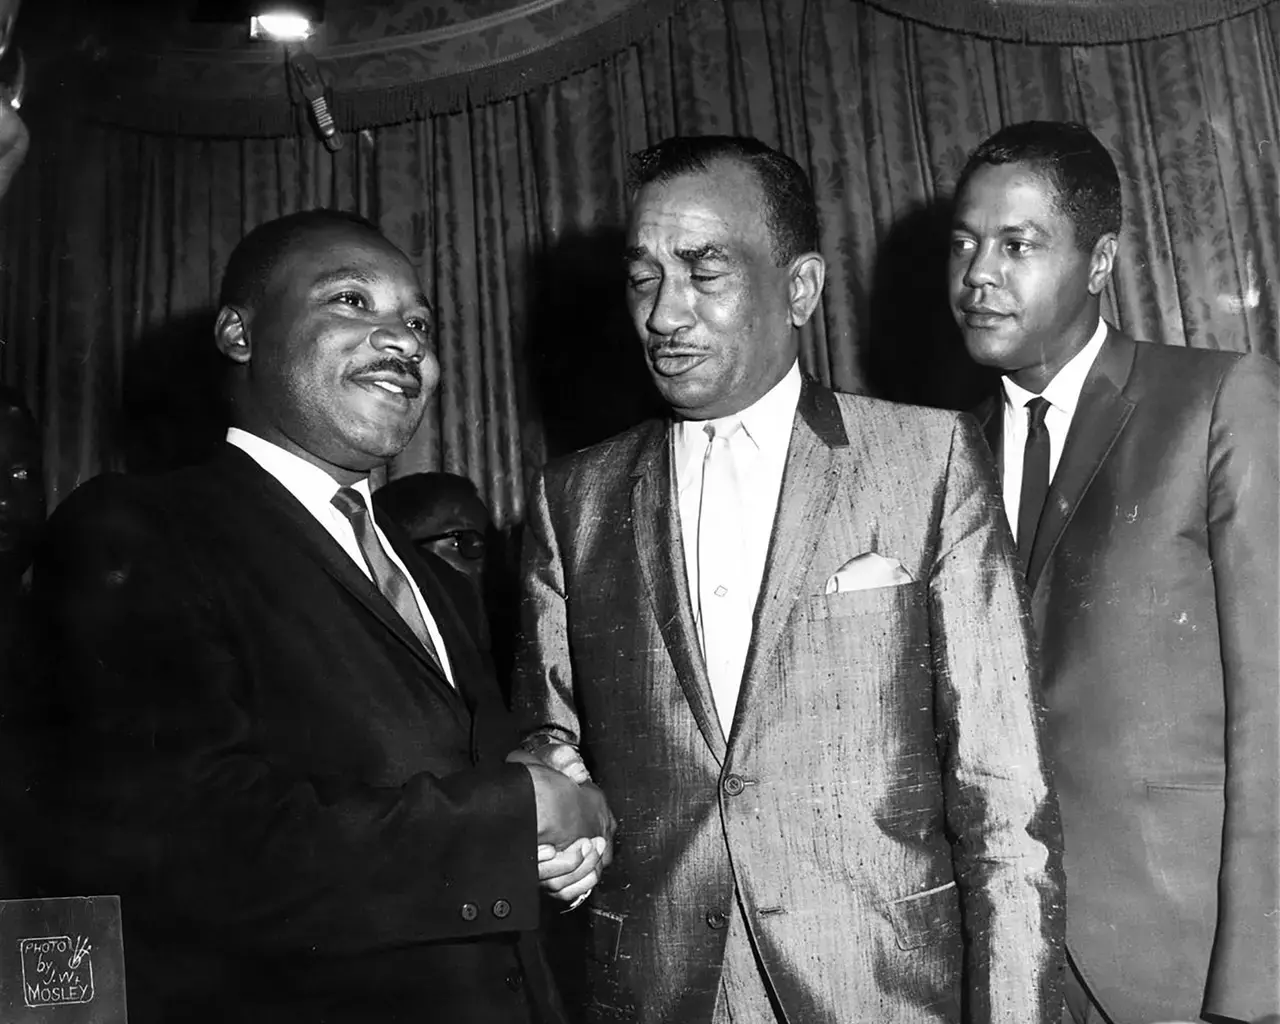 Civil rights activist Rev. Dr. Martin Luther King, Jr., Esquire Cecil B. Moore, and radio personality Georgie Woods, 1965. Photo by John W. Mosley.